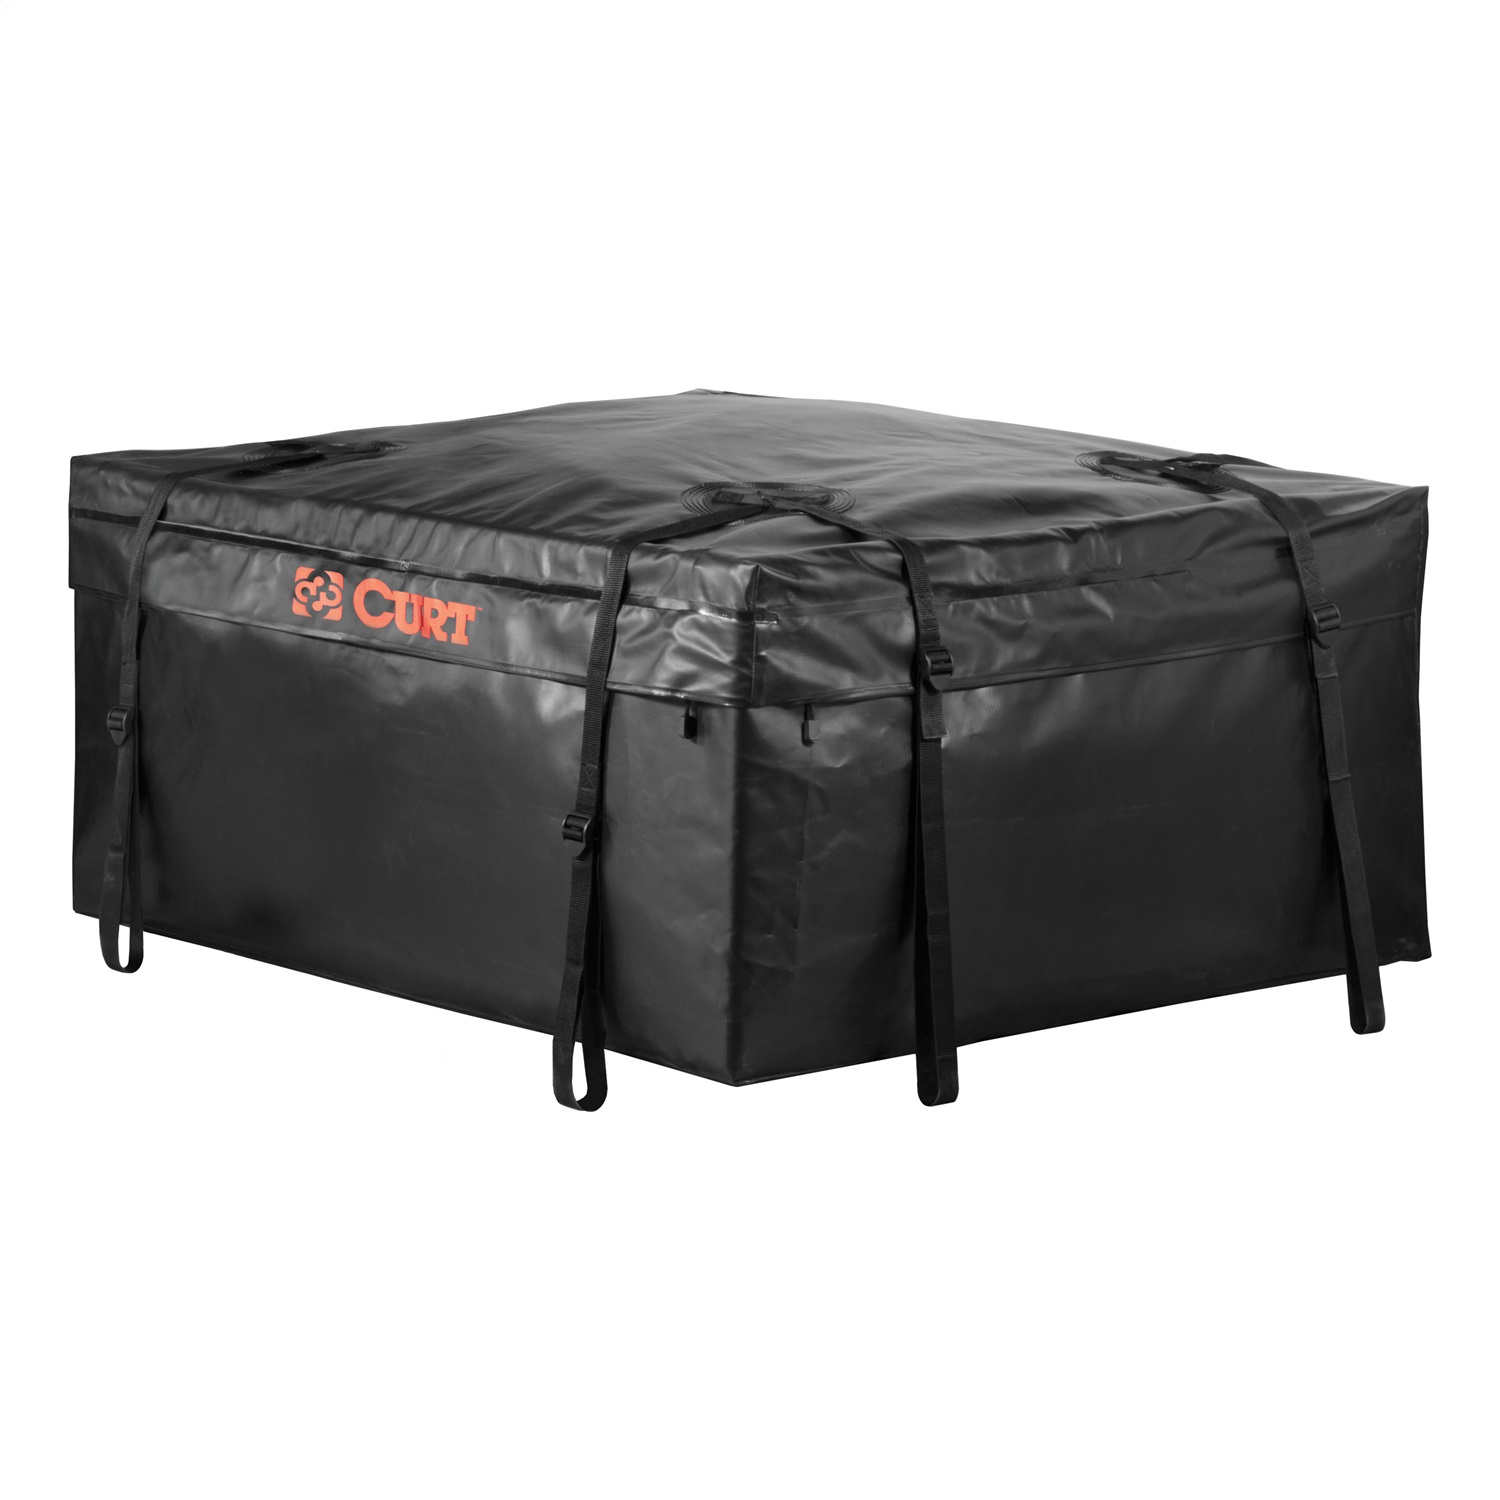 CURT Manufacturing CURT Manufacturing 18220 Waterproof Rooftop Carrier Cargo Bag  Fits